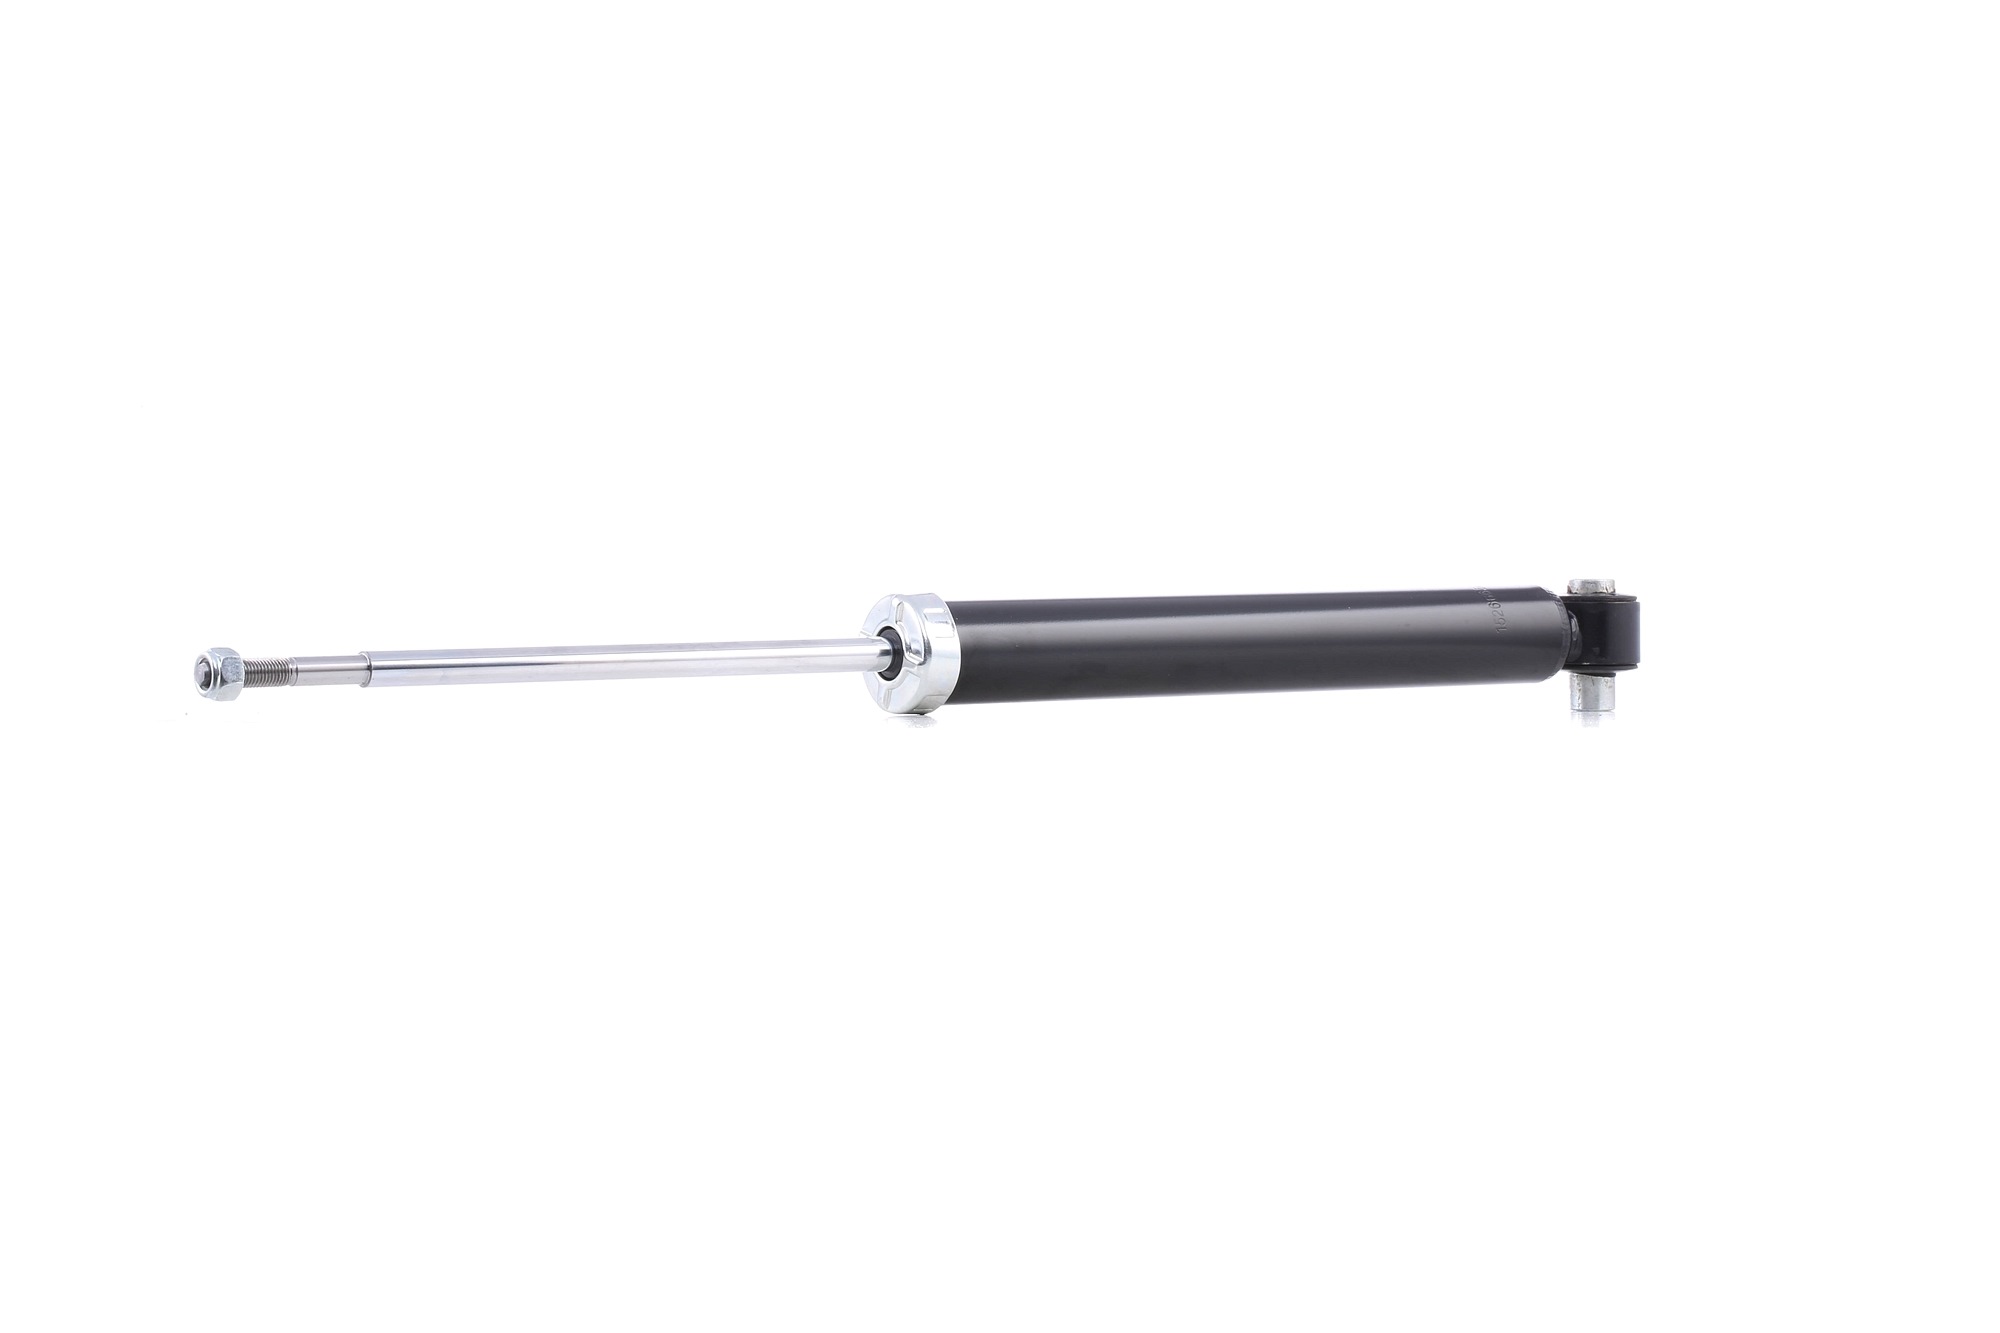 RIDEX 854S0436 Shock absorber Rear Axle, Gas Pressure, 533x328 mm, Twin-Tube, Absorber does not carry a spring, Telescopic Shock Absorber, Bottom eye, Top pin